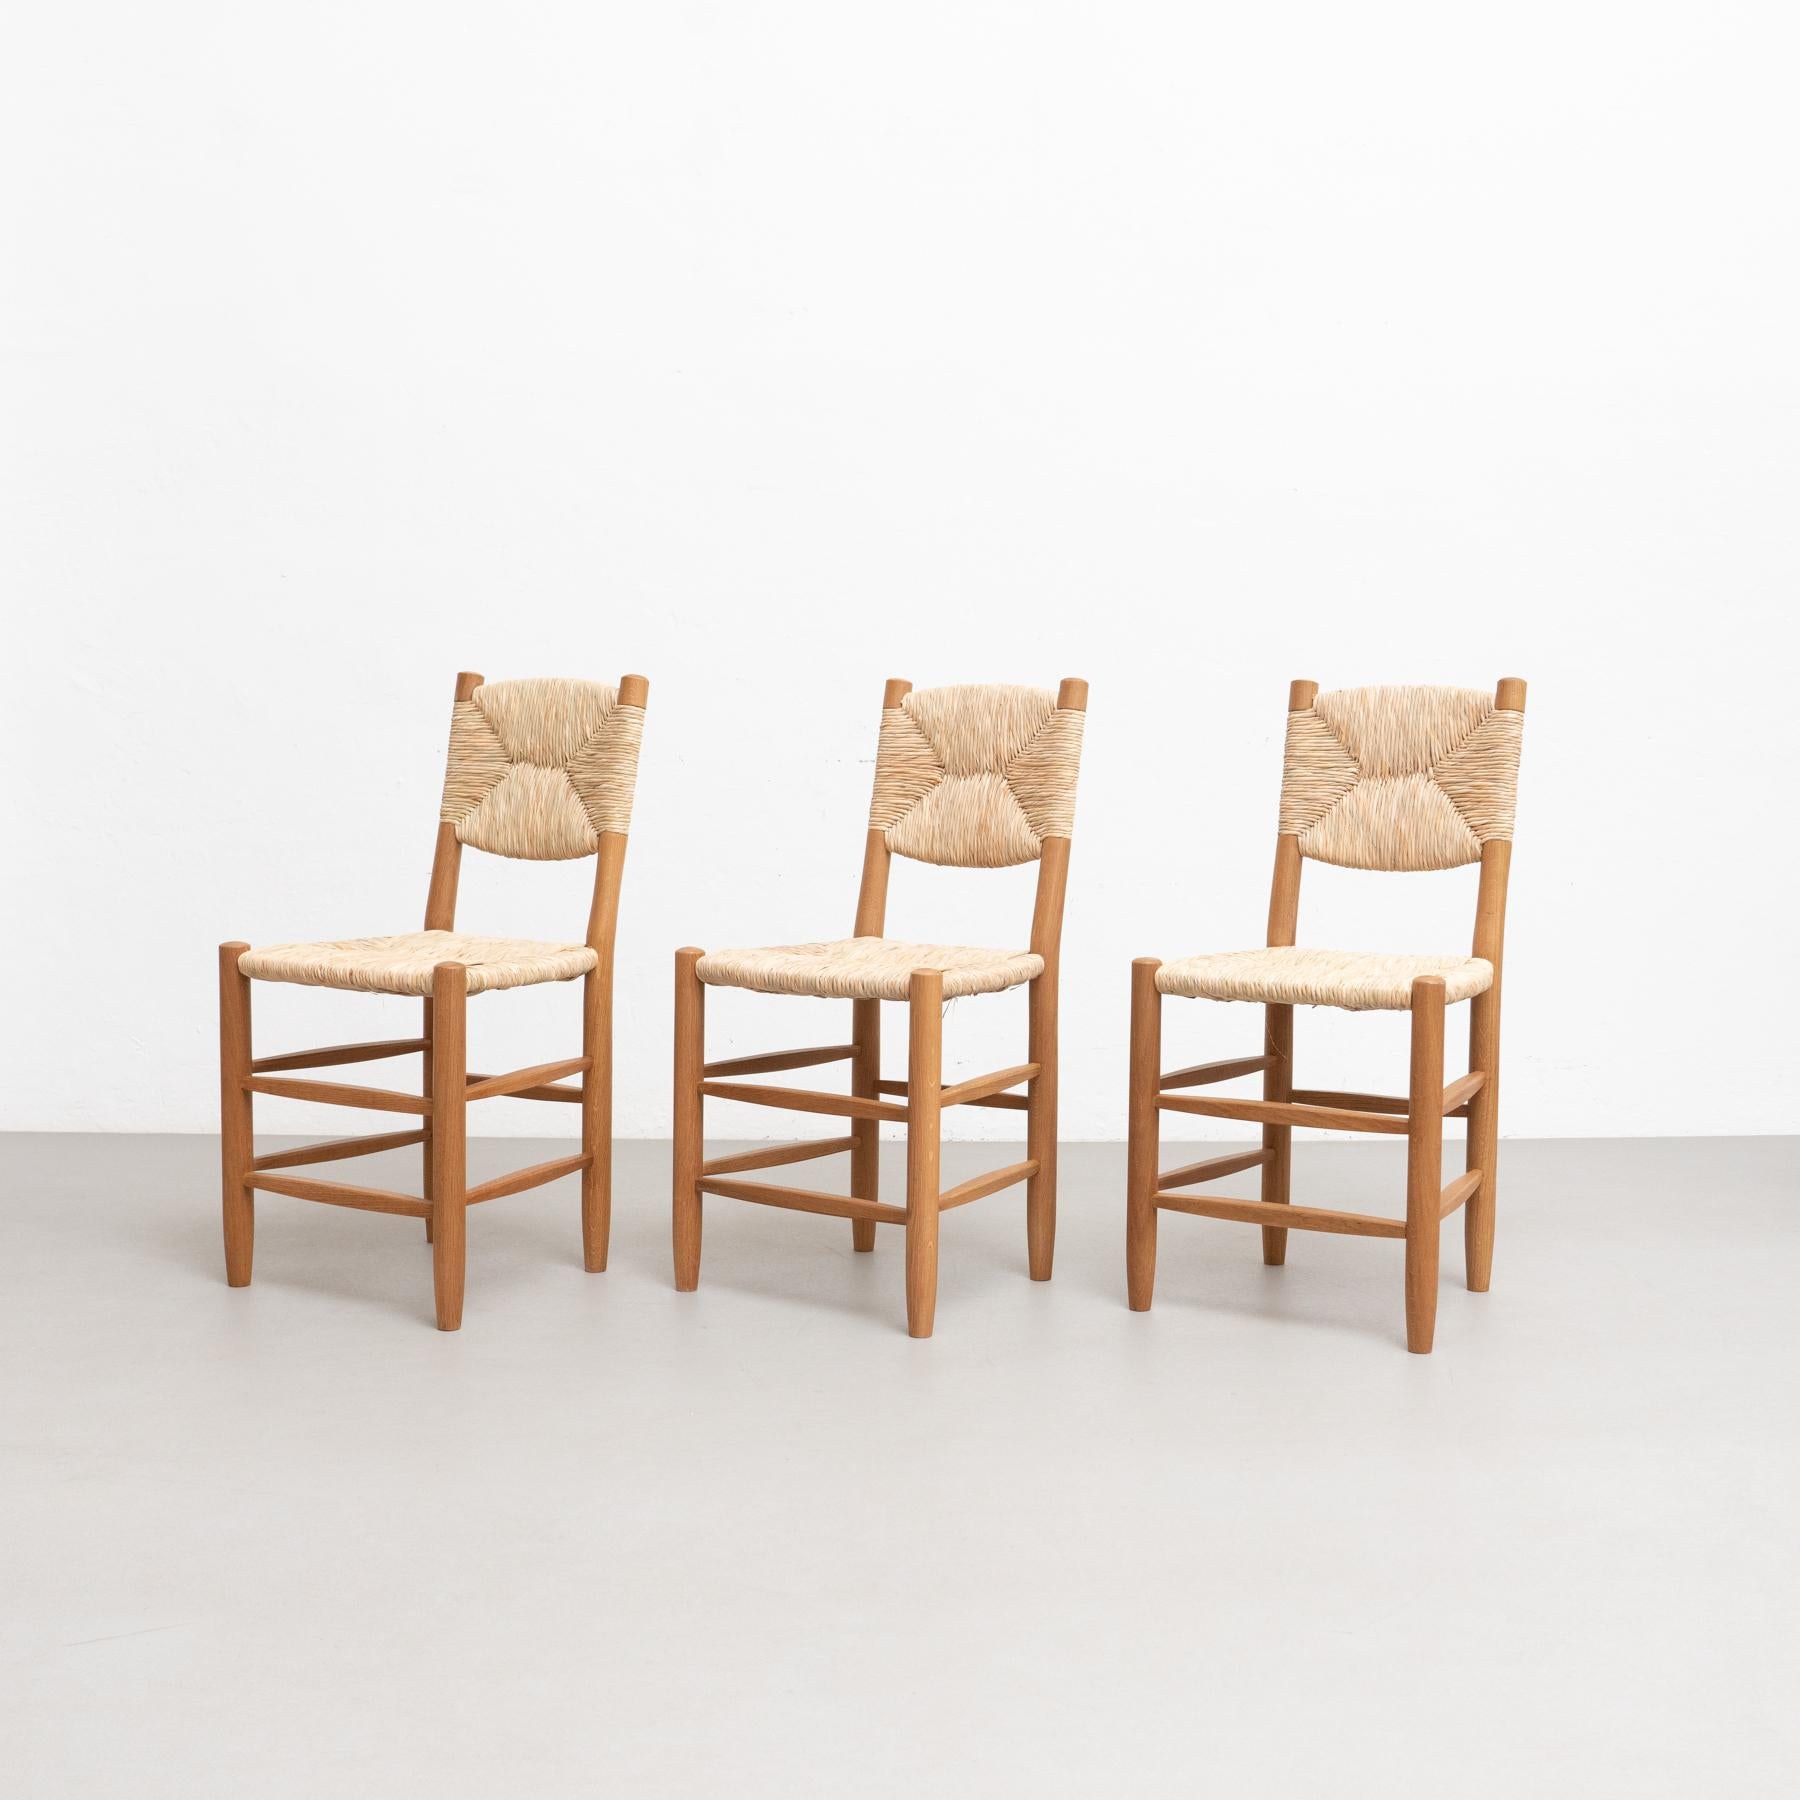 Set of 6 After Charlotte Perriand n.19 Chairs, Wood Rattan, Mid-Century Modern For Sale 5